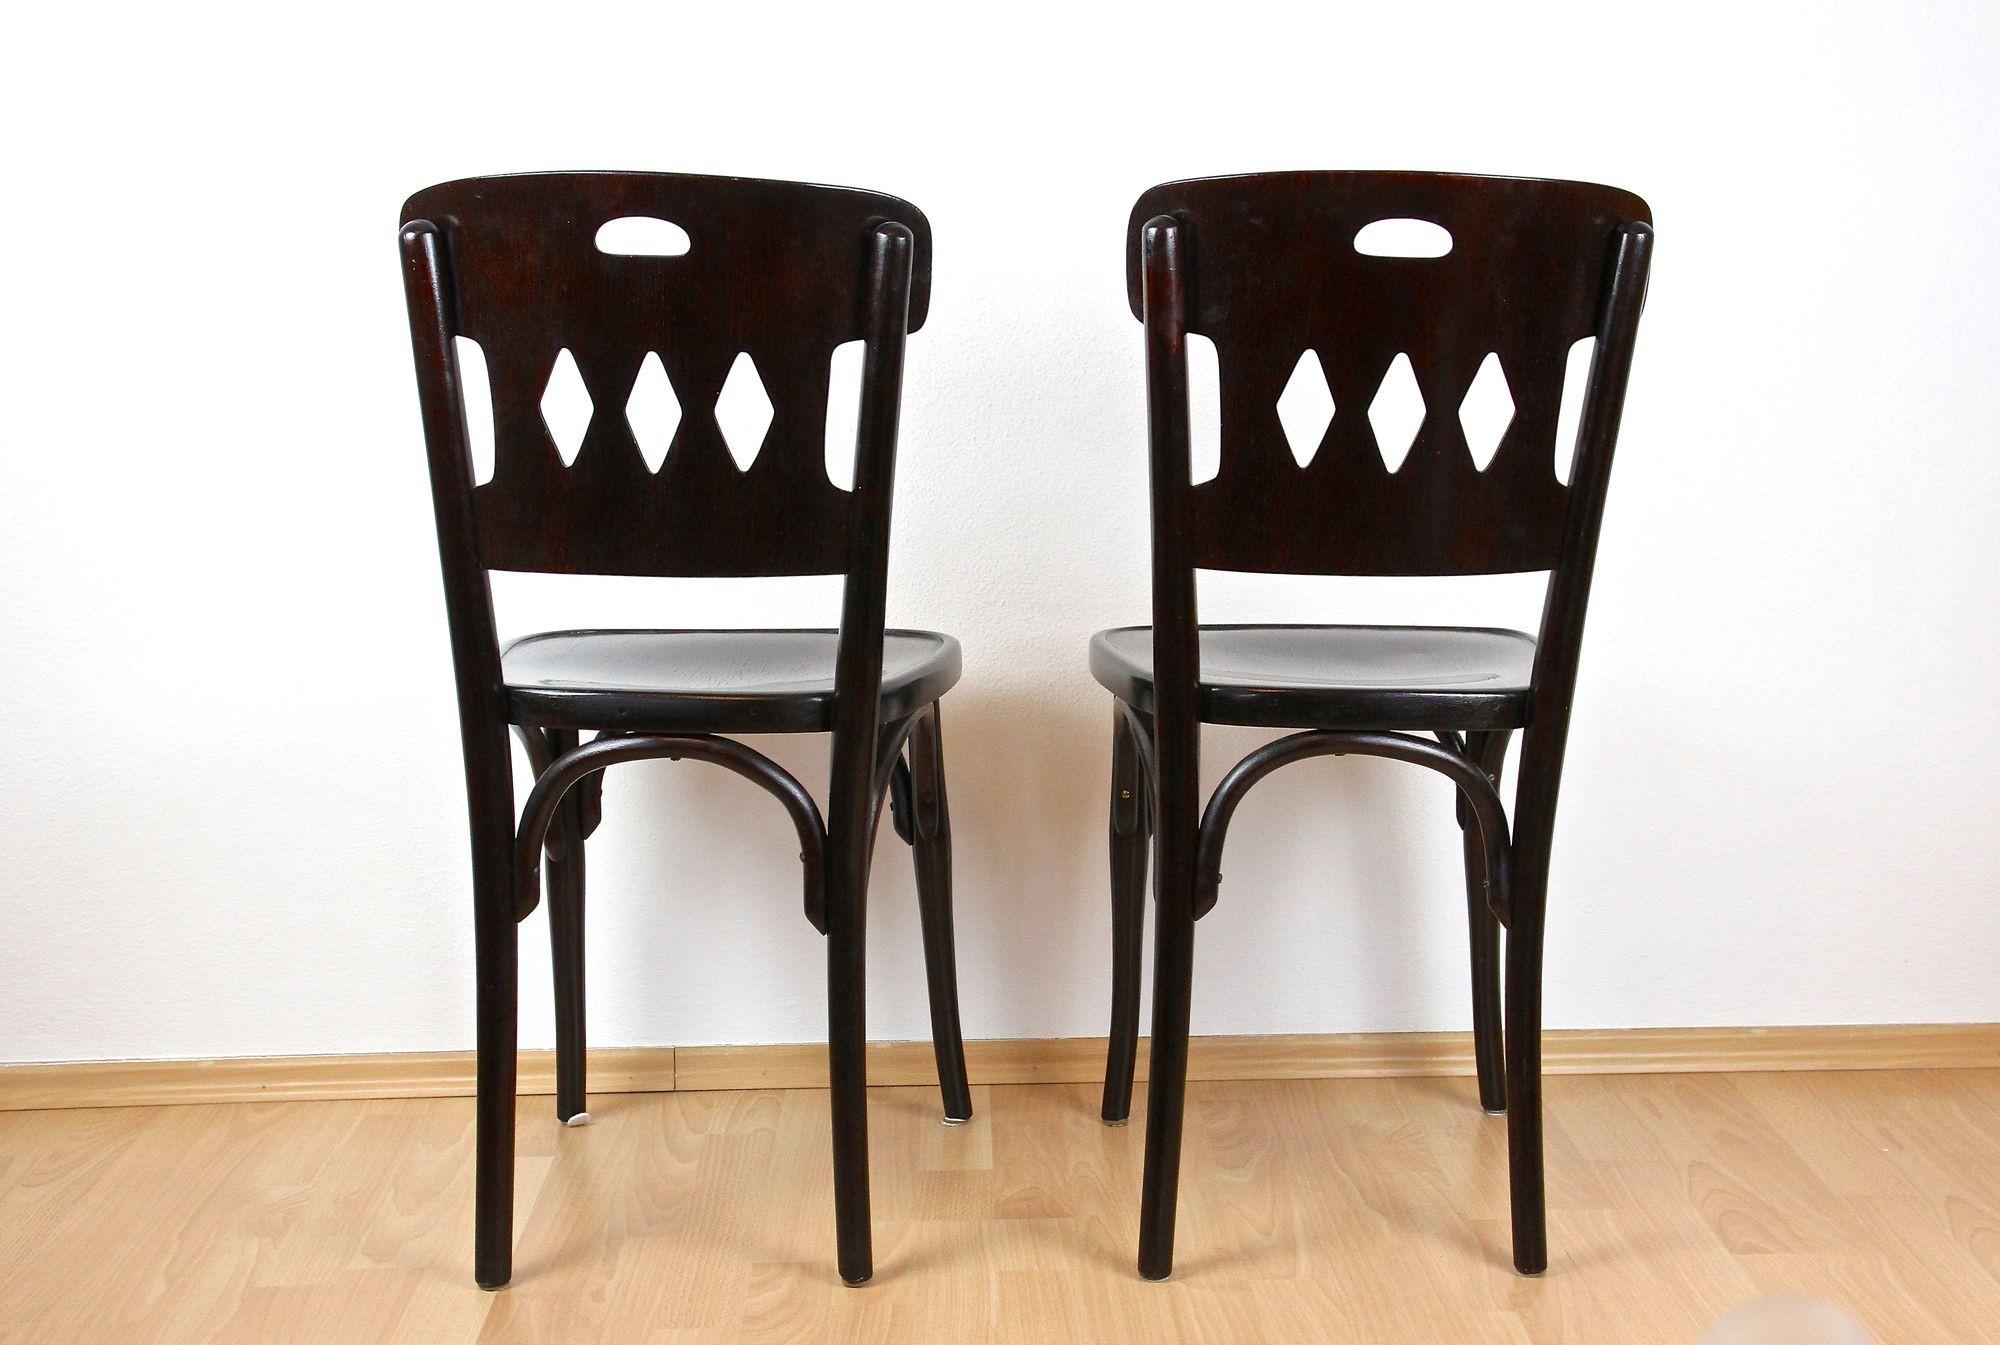 Pair Of Art Nouveau Bentwood Chairs by J&J Kohn, Vienna ca. 1910 For Sale 3